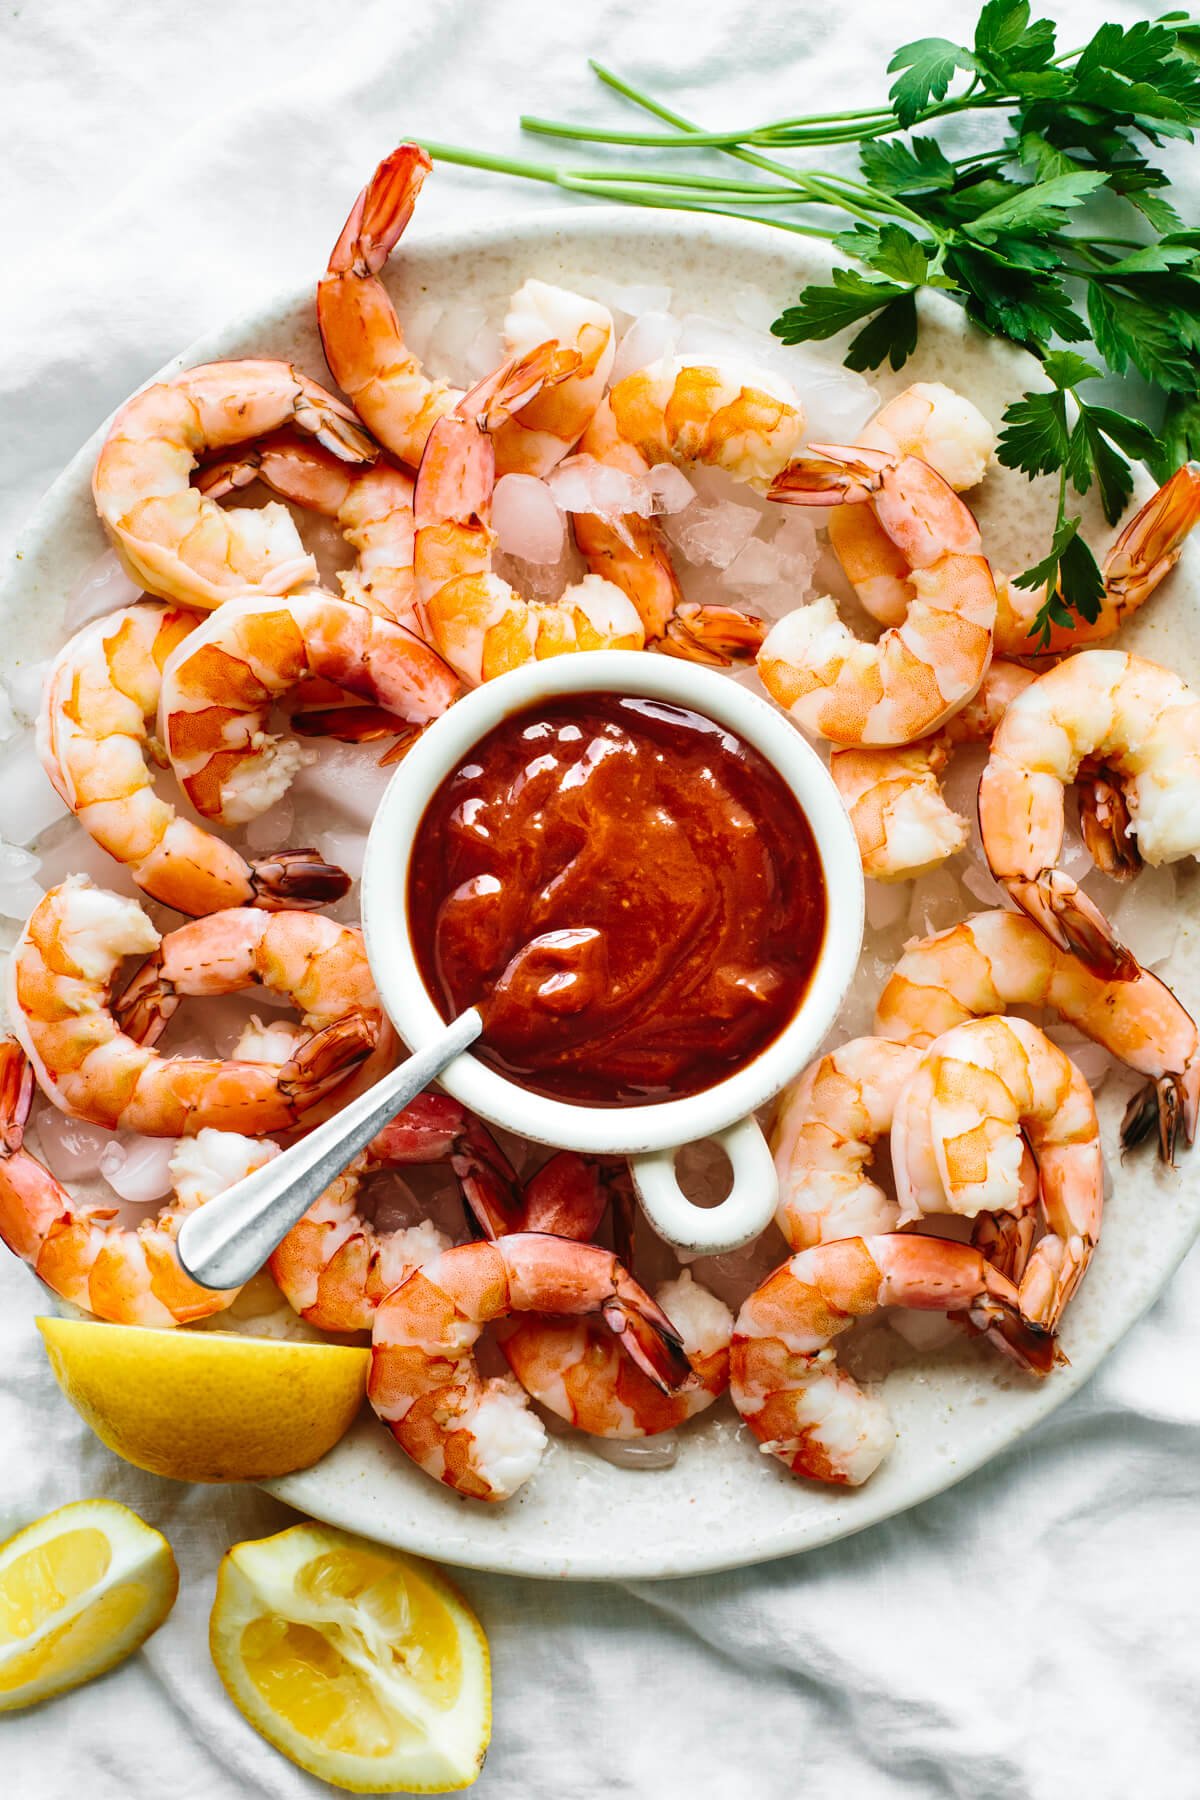 Shrimp cocktail on a platter with sauce.